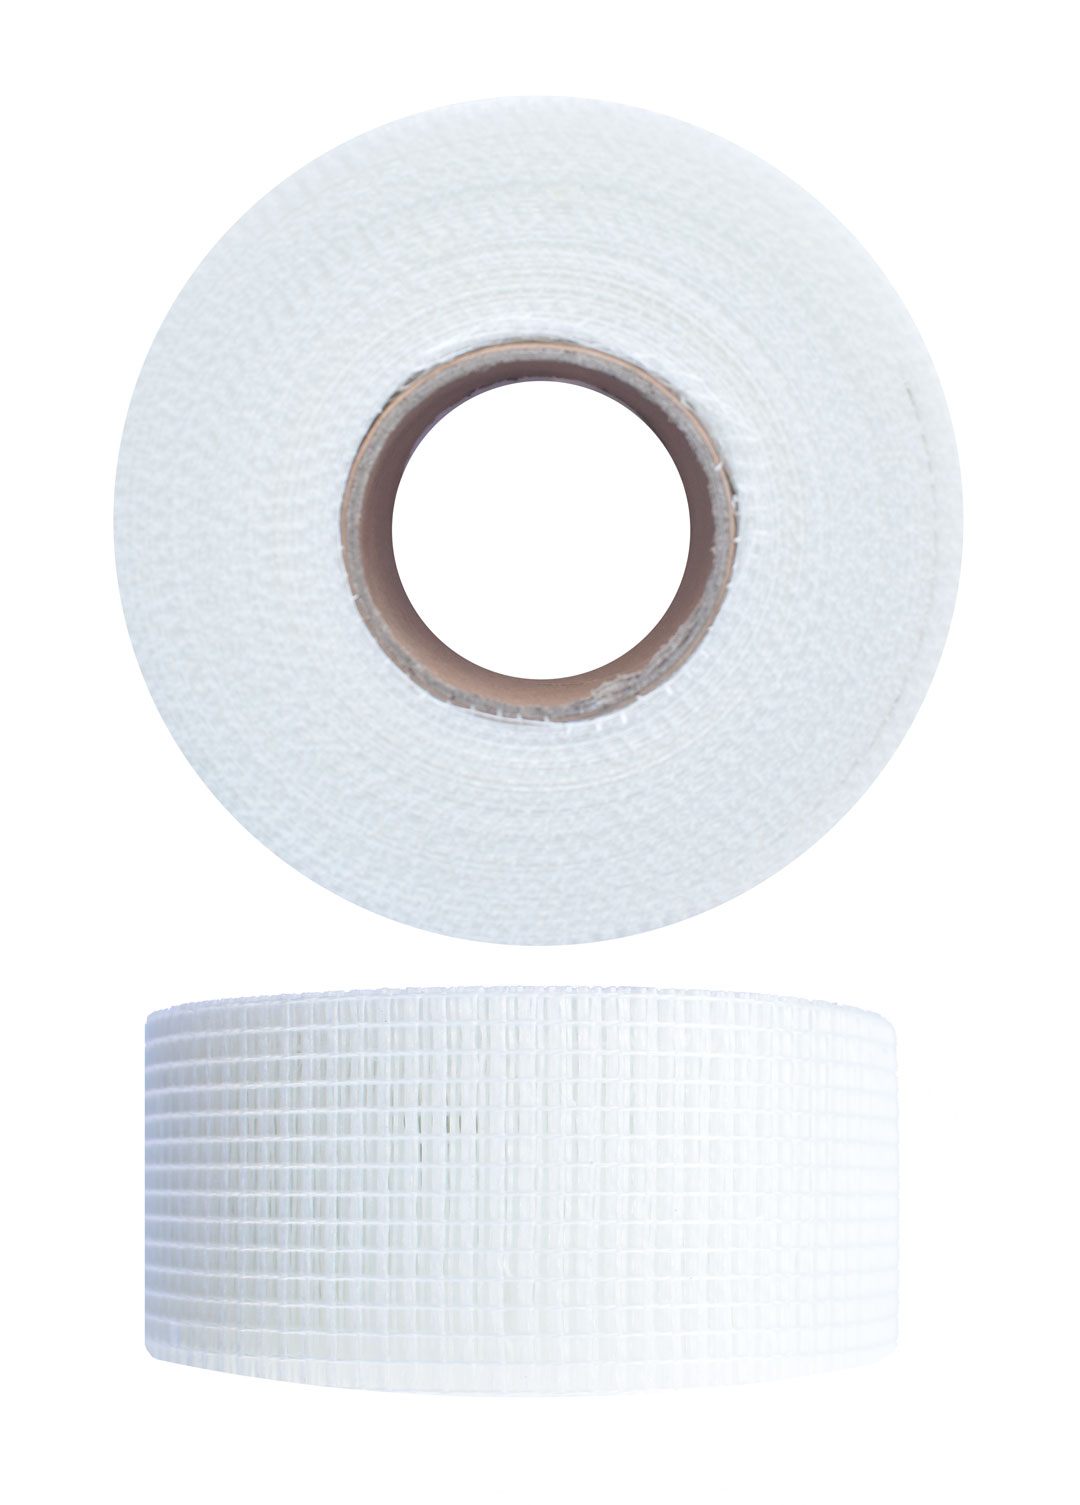 DRY WALL JOINT TAPE 48MM X 45M